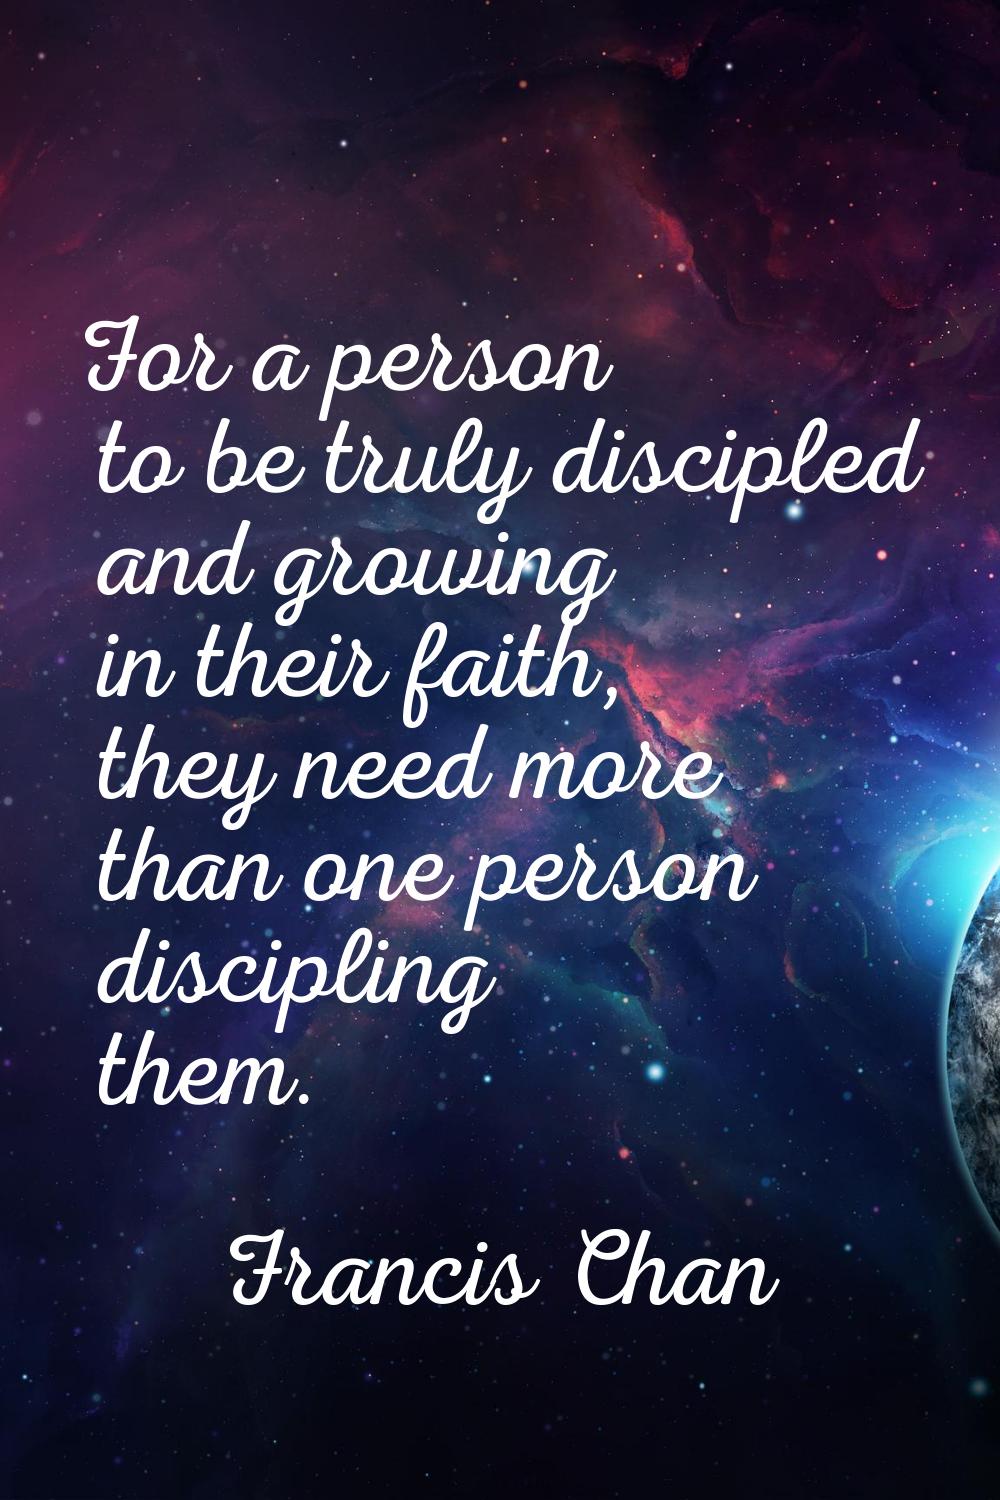 For a person to be truly discipled and growing in their faith, they need more than one person disci